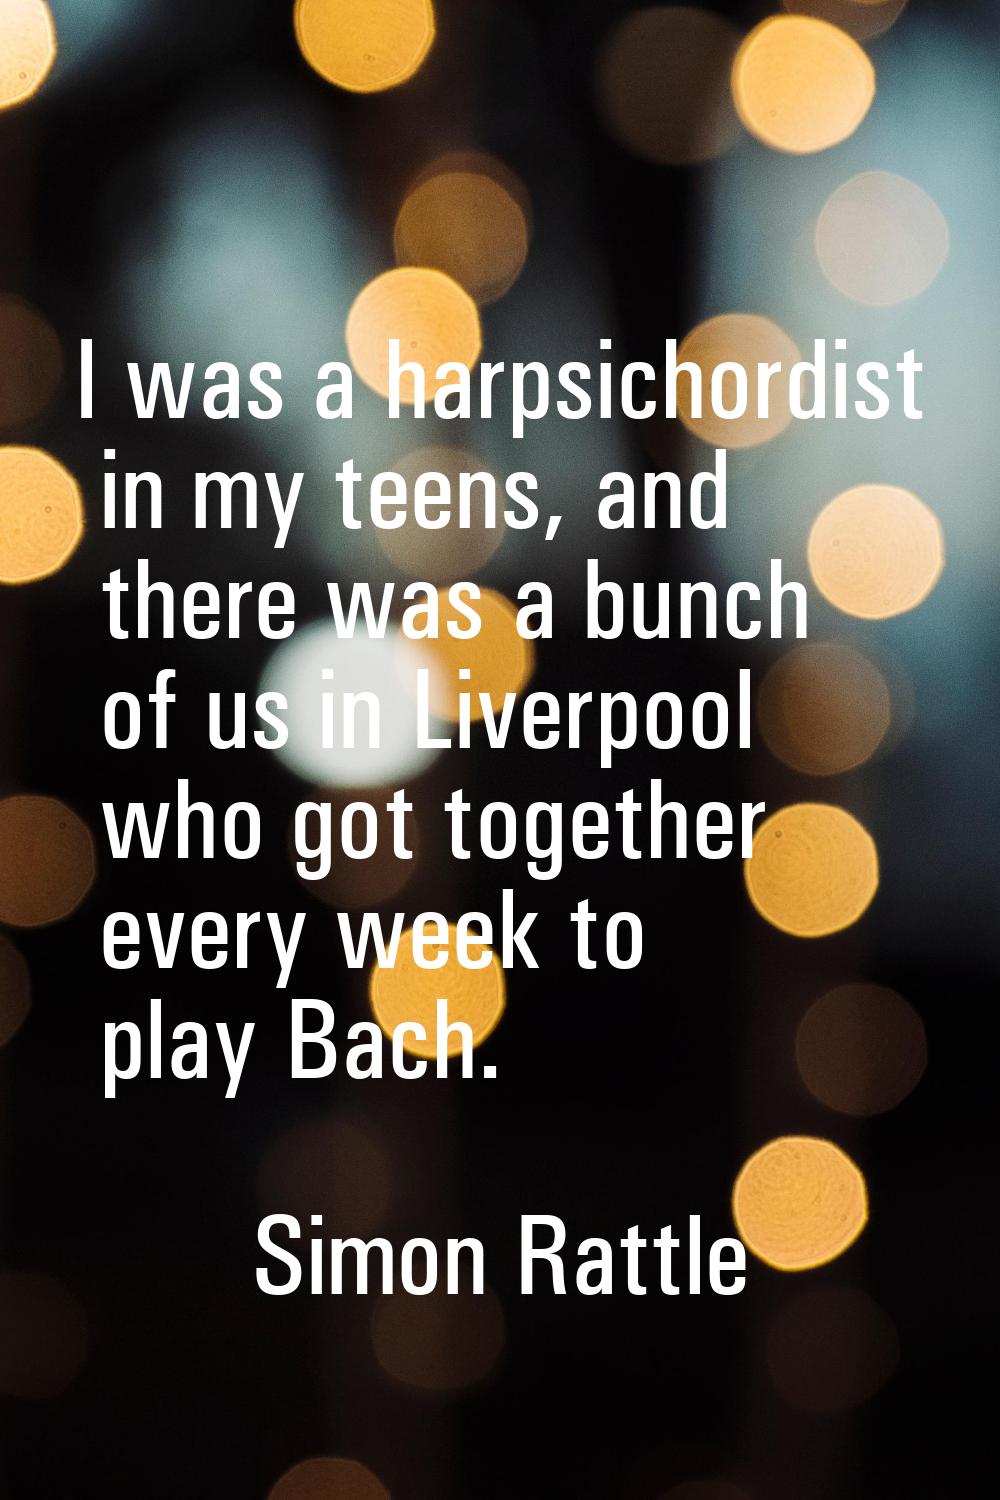 I was a harpsichordist in my teens, and there was a bunch of us in Liverpool who got together every